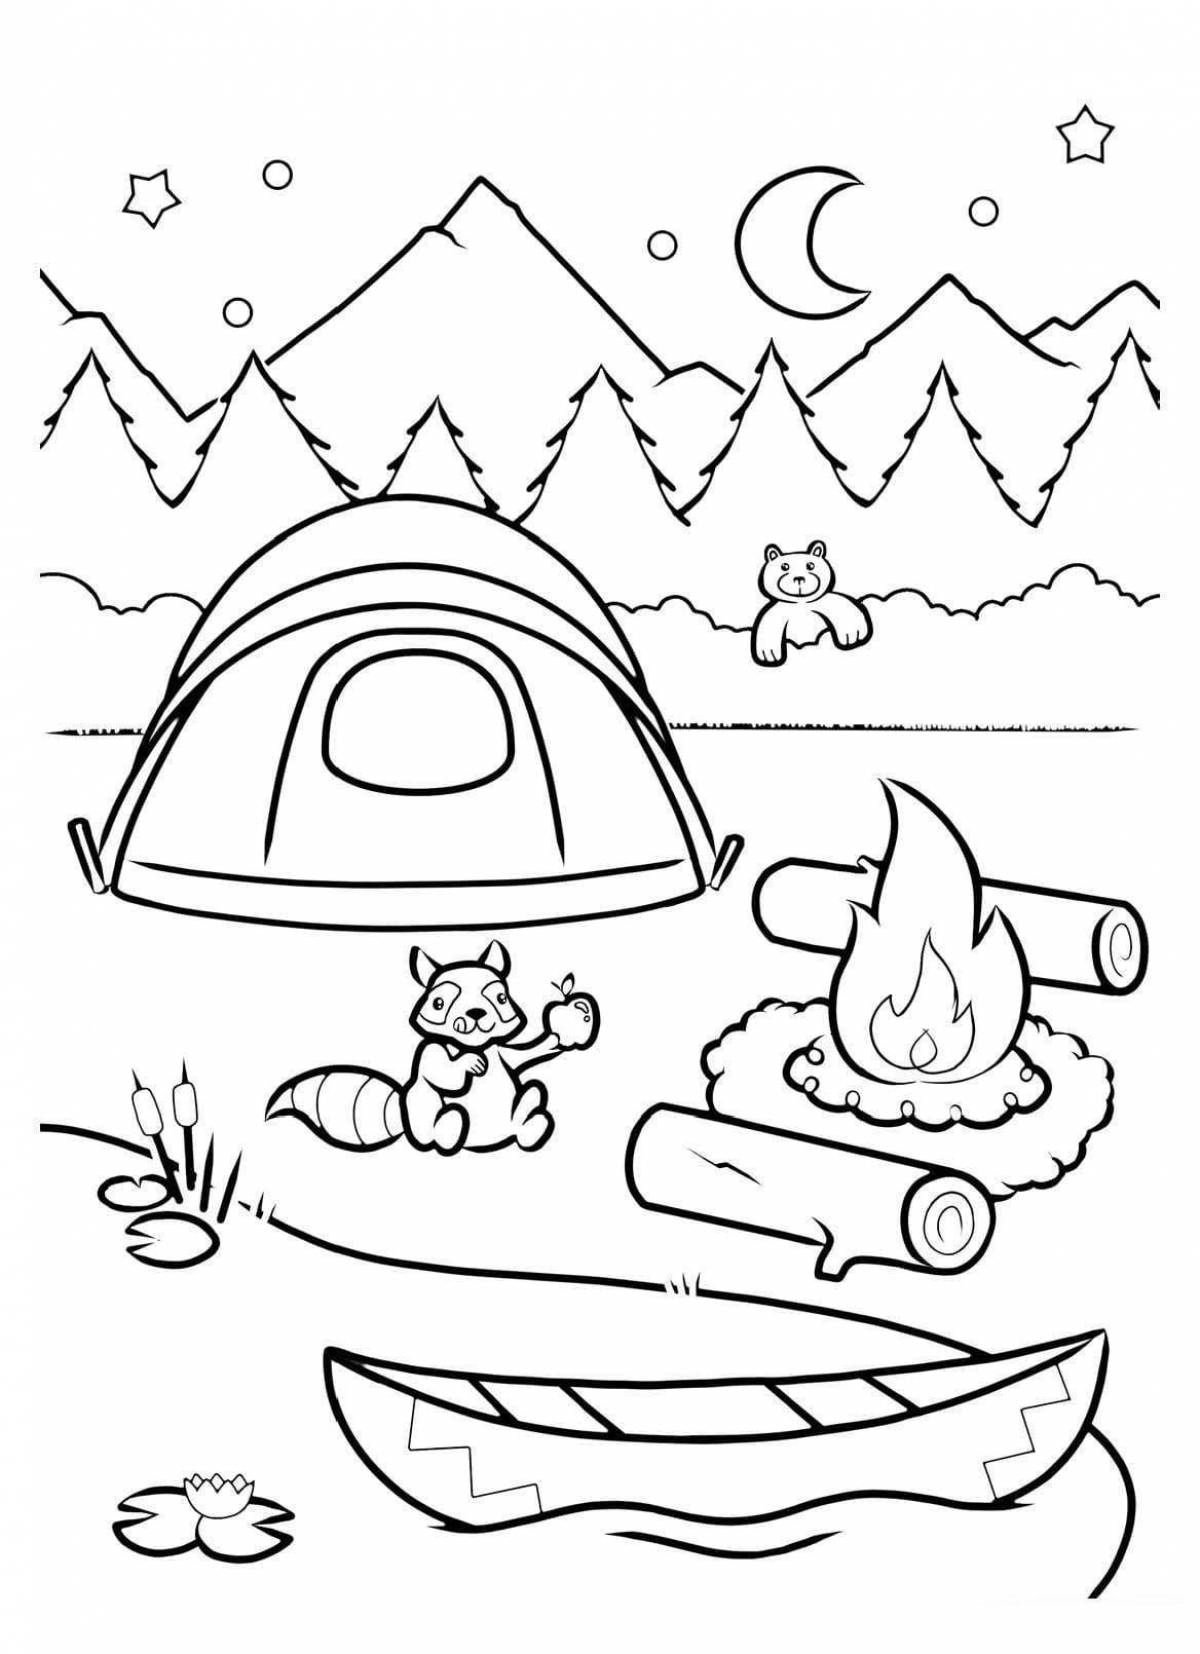 Magic tent coloring page